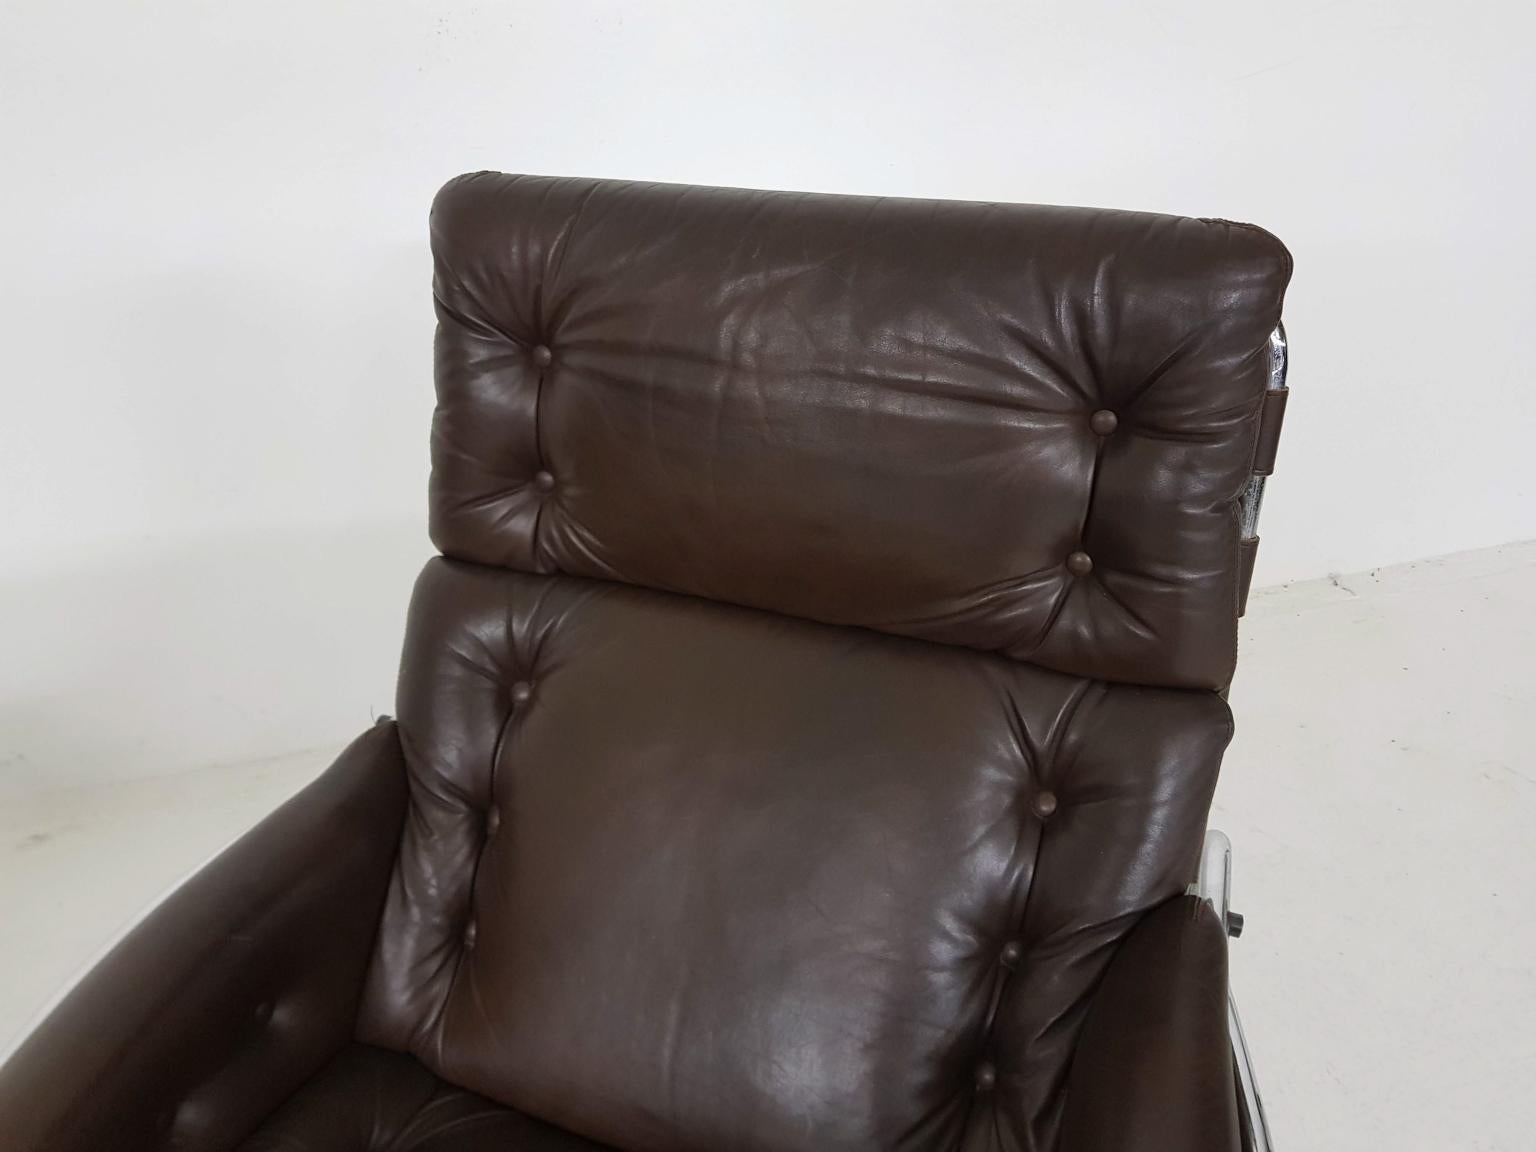 1x Nagoya Brown Leather Lounge Chair by Martin Visser for ’t Spectrum, Dutch '69 2